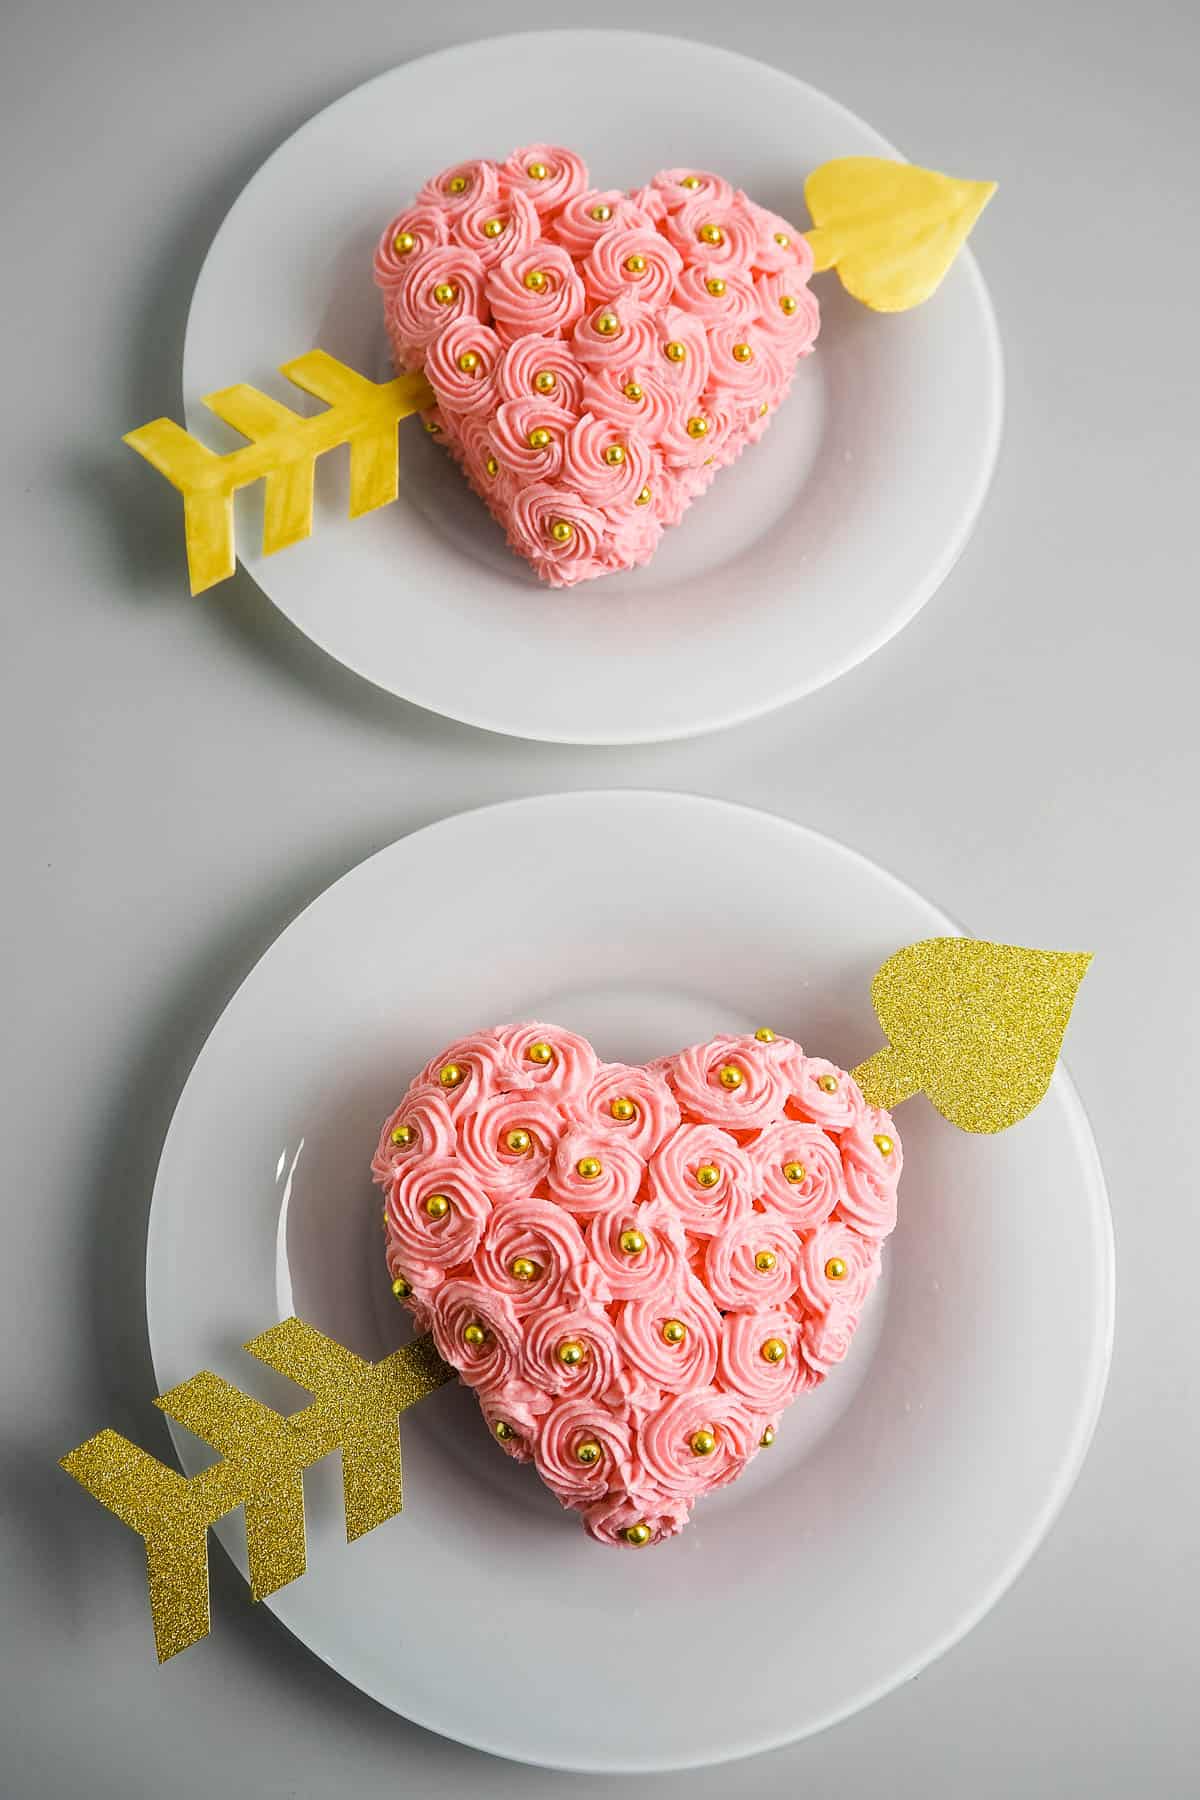 Two heart shaped cakes with pink buttercream rosettes frosting and gold arrows on white plates.